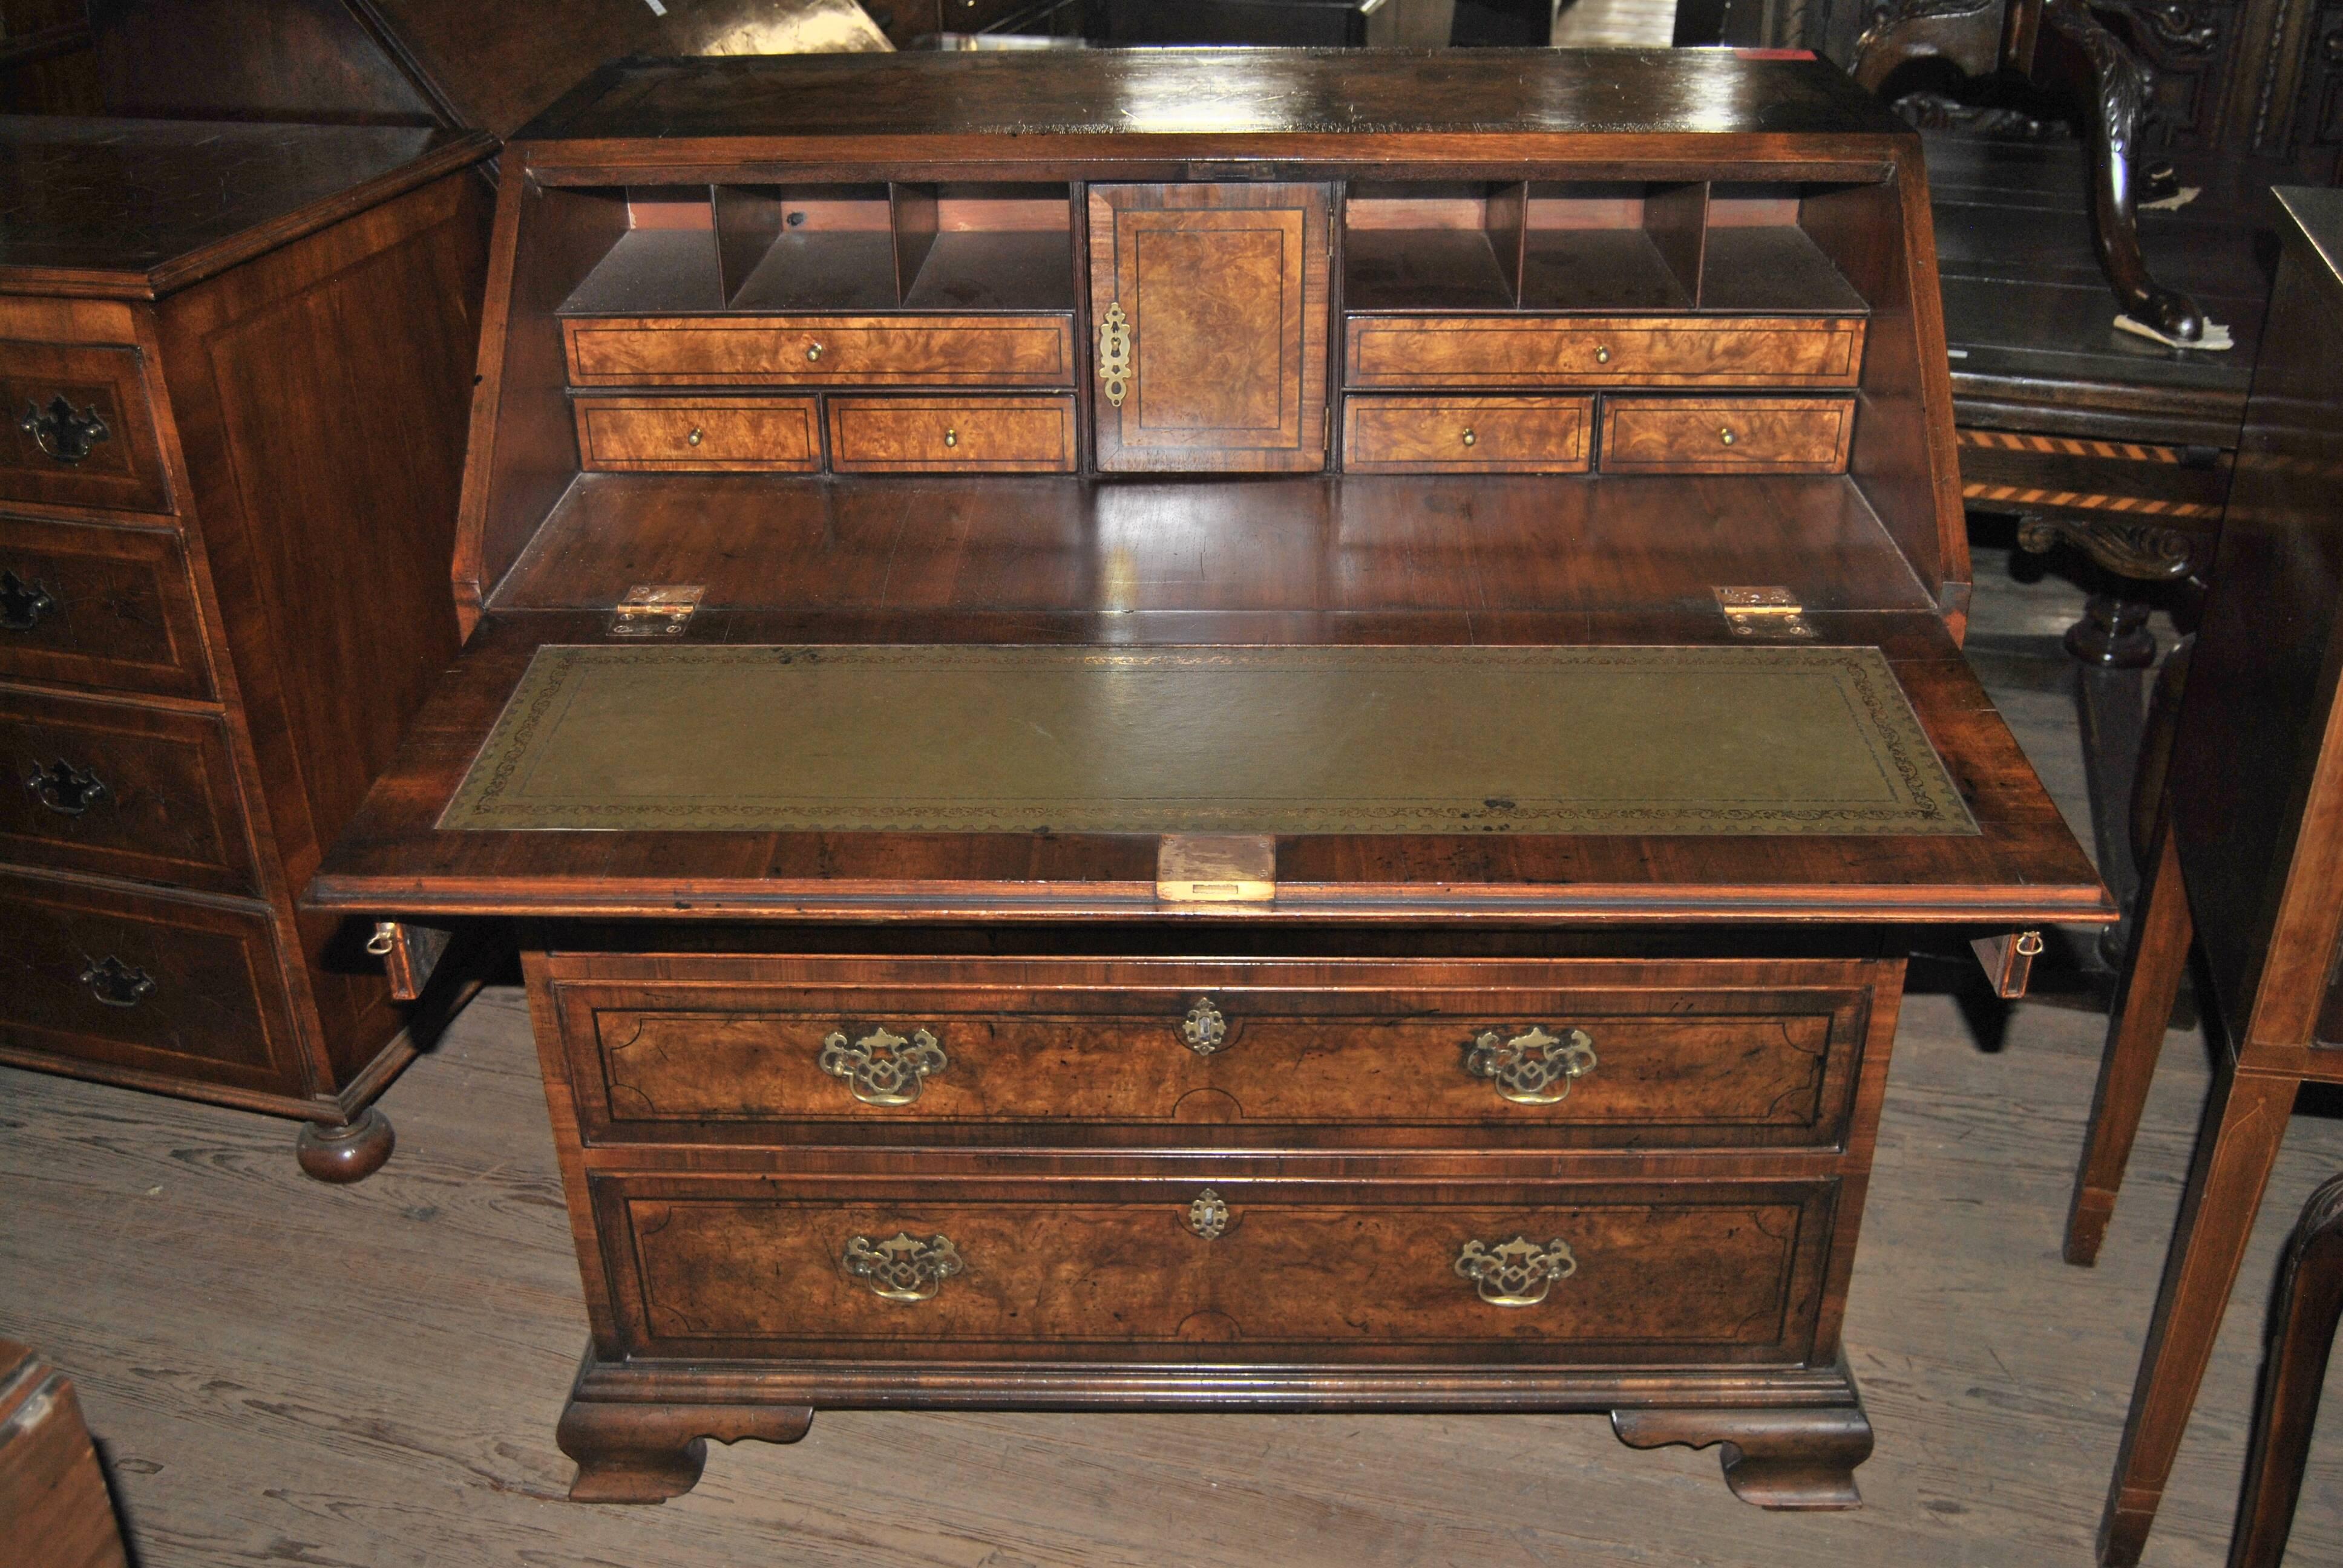 This is a slant front secretary or bureau made in England circa 1780. It is made of Kashmir walnut (the finest cut of burr walnut) and walnut. The top, the slant fall and the drawer fronts are all banded in walnut with a string inlay of ebony, with